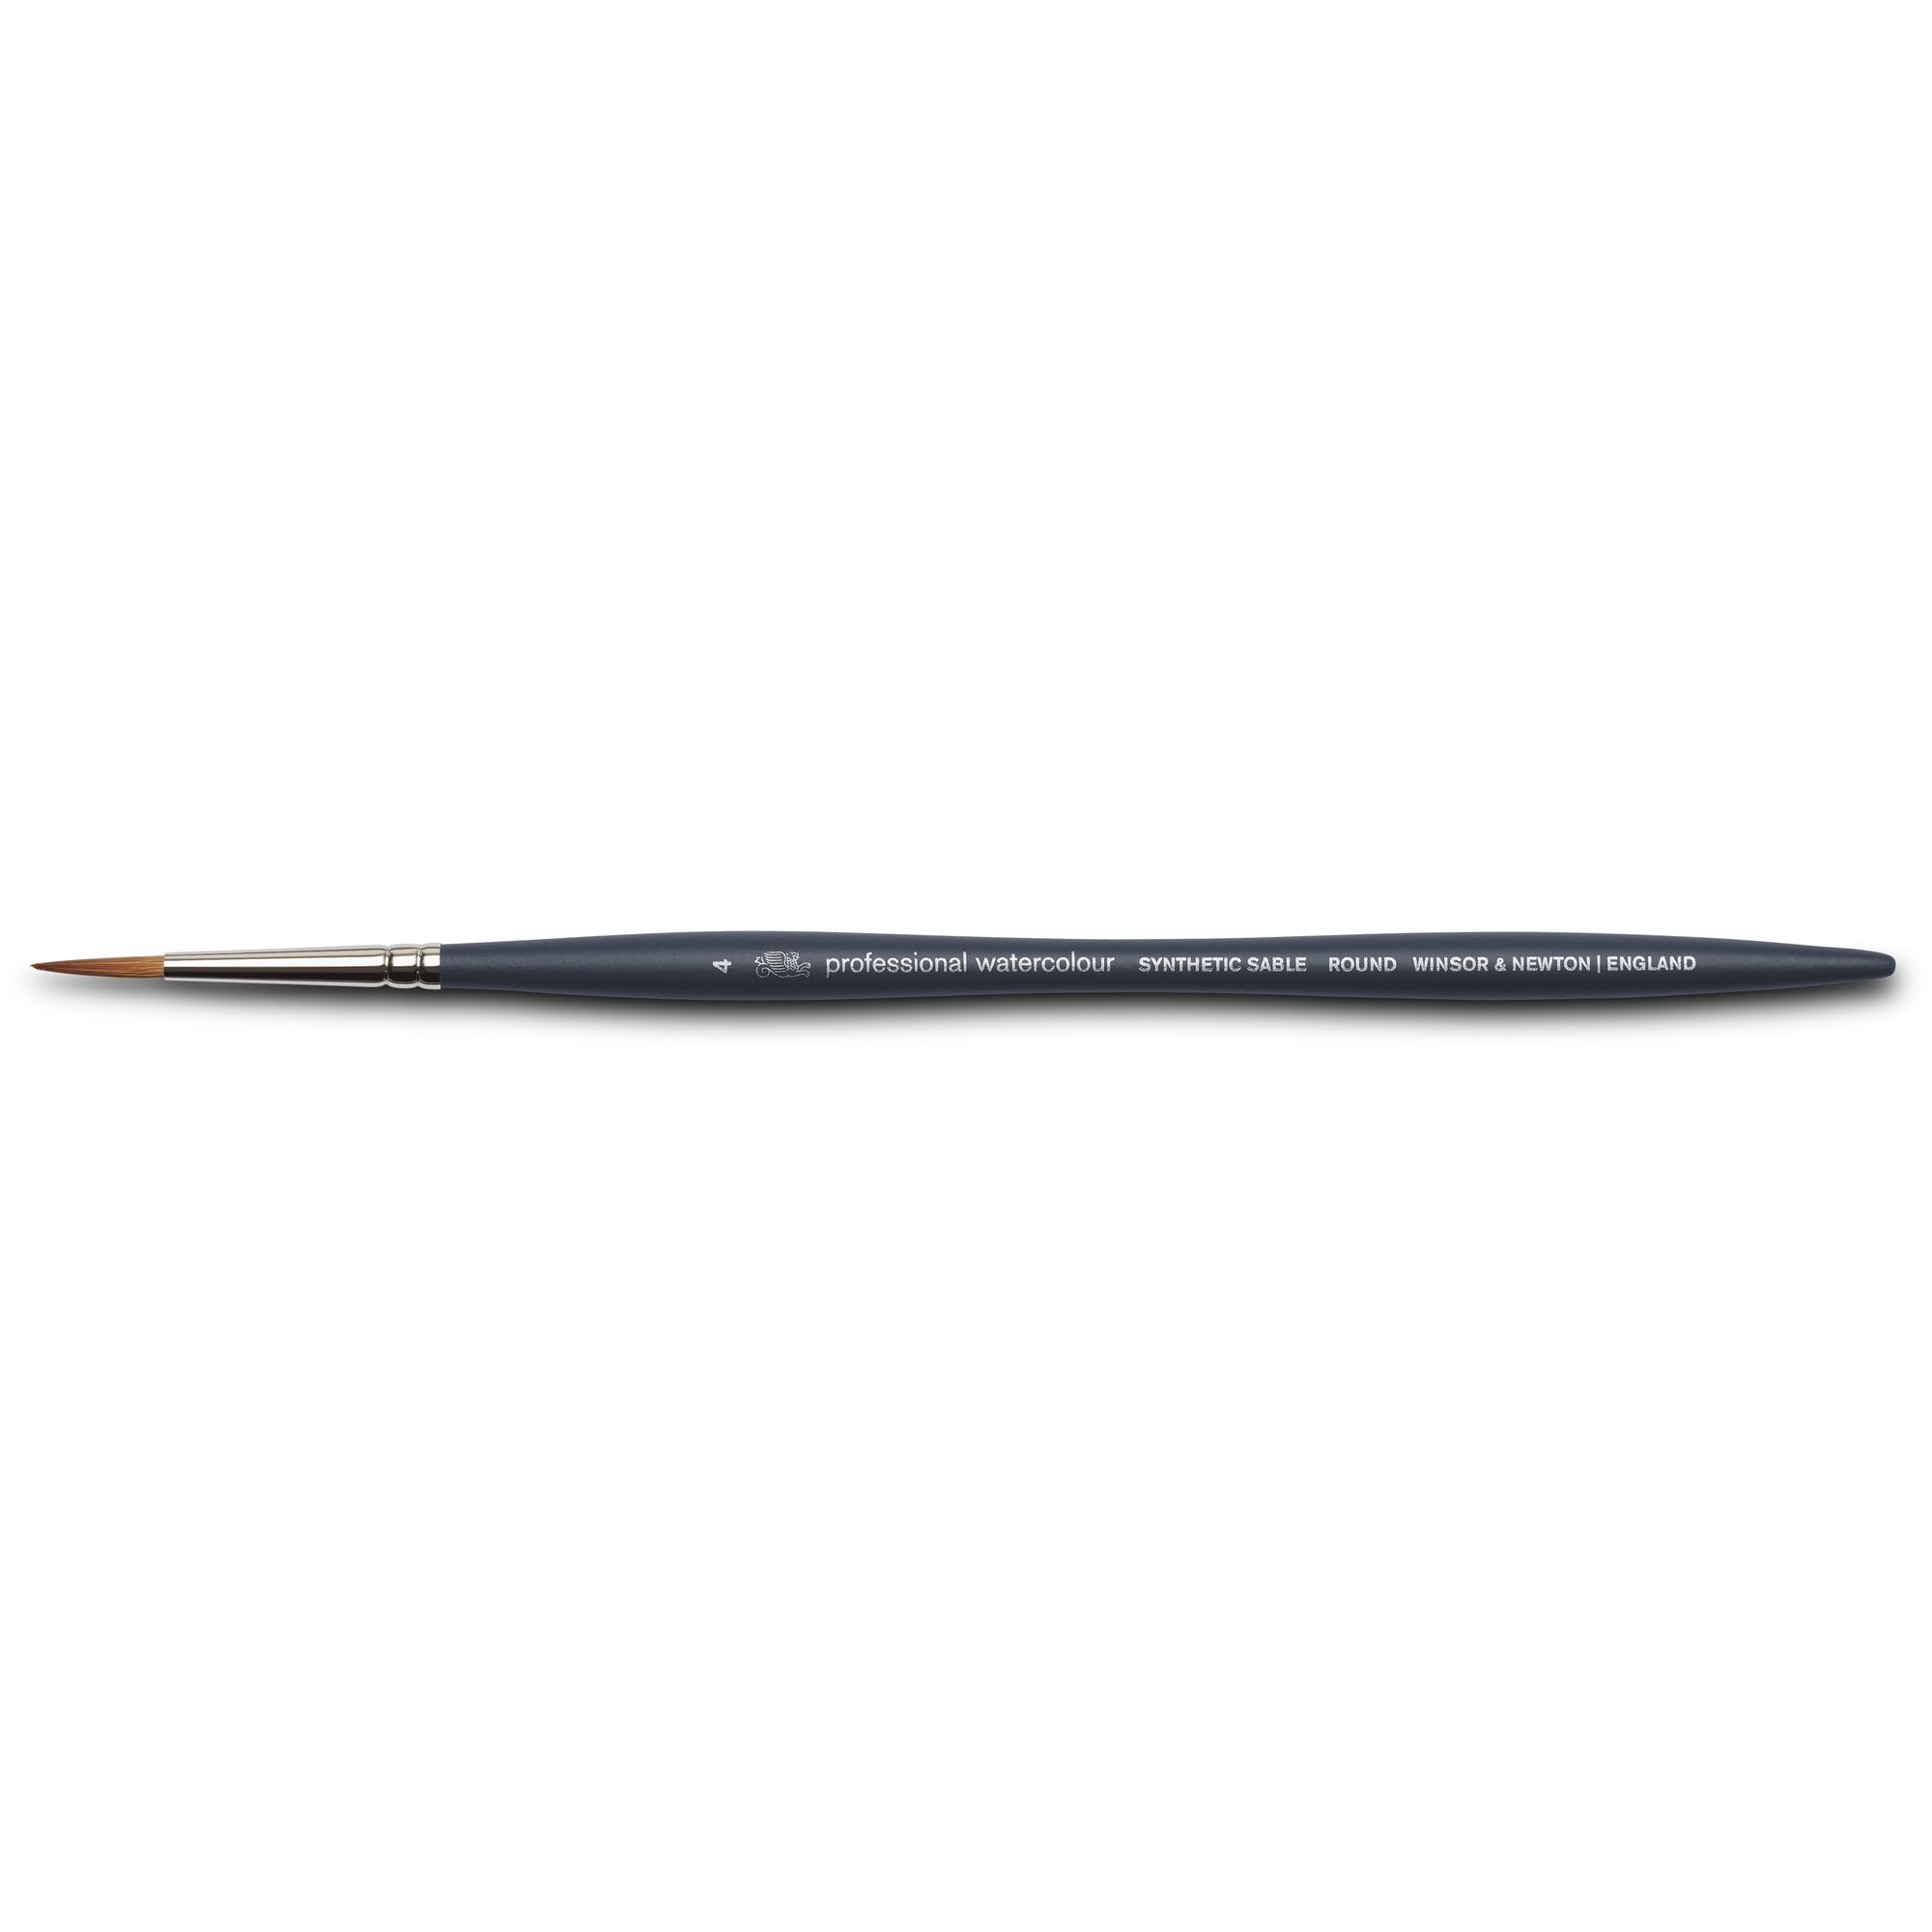 Winsor & Newton Professional Watercolour Synthetic Sable Brush Round 4